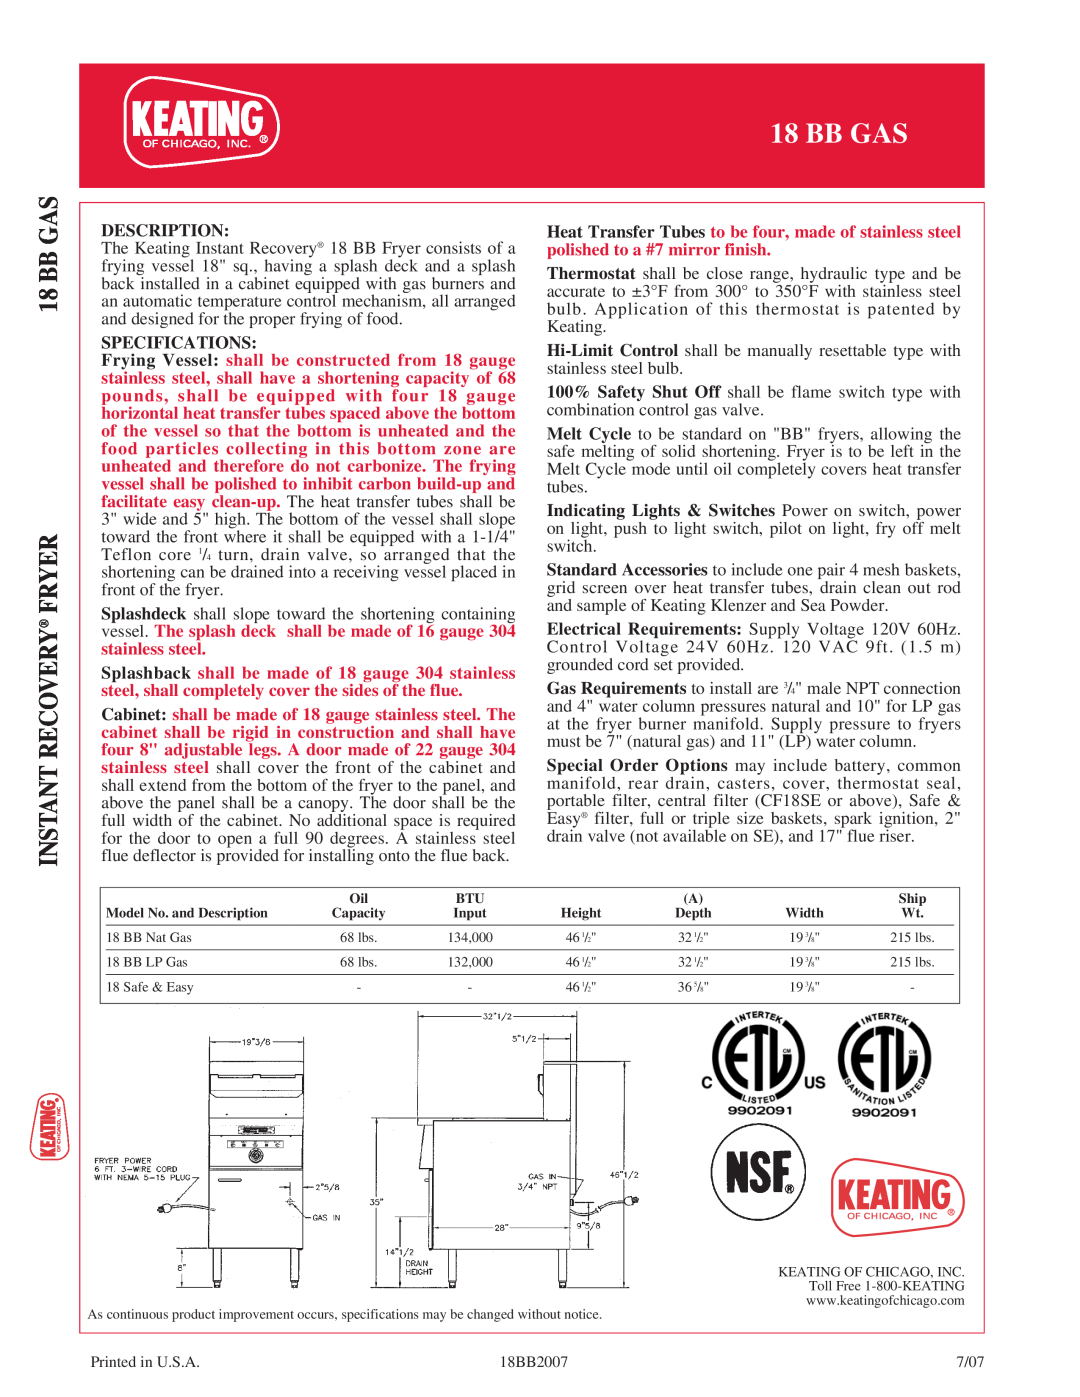 Keating Of Chicago 18 BB GAS manual Bb Gas Instant Recovery Fryer, Description, Specifications 